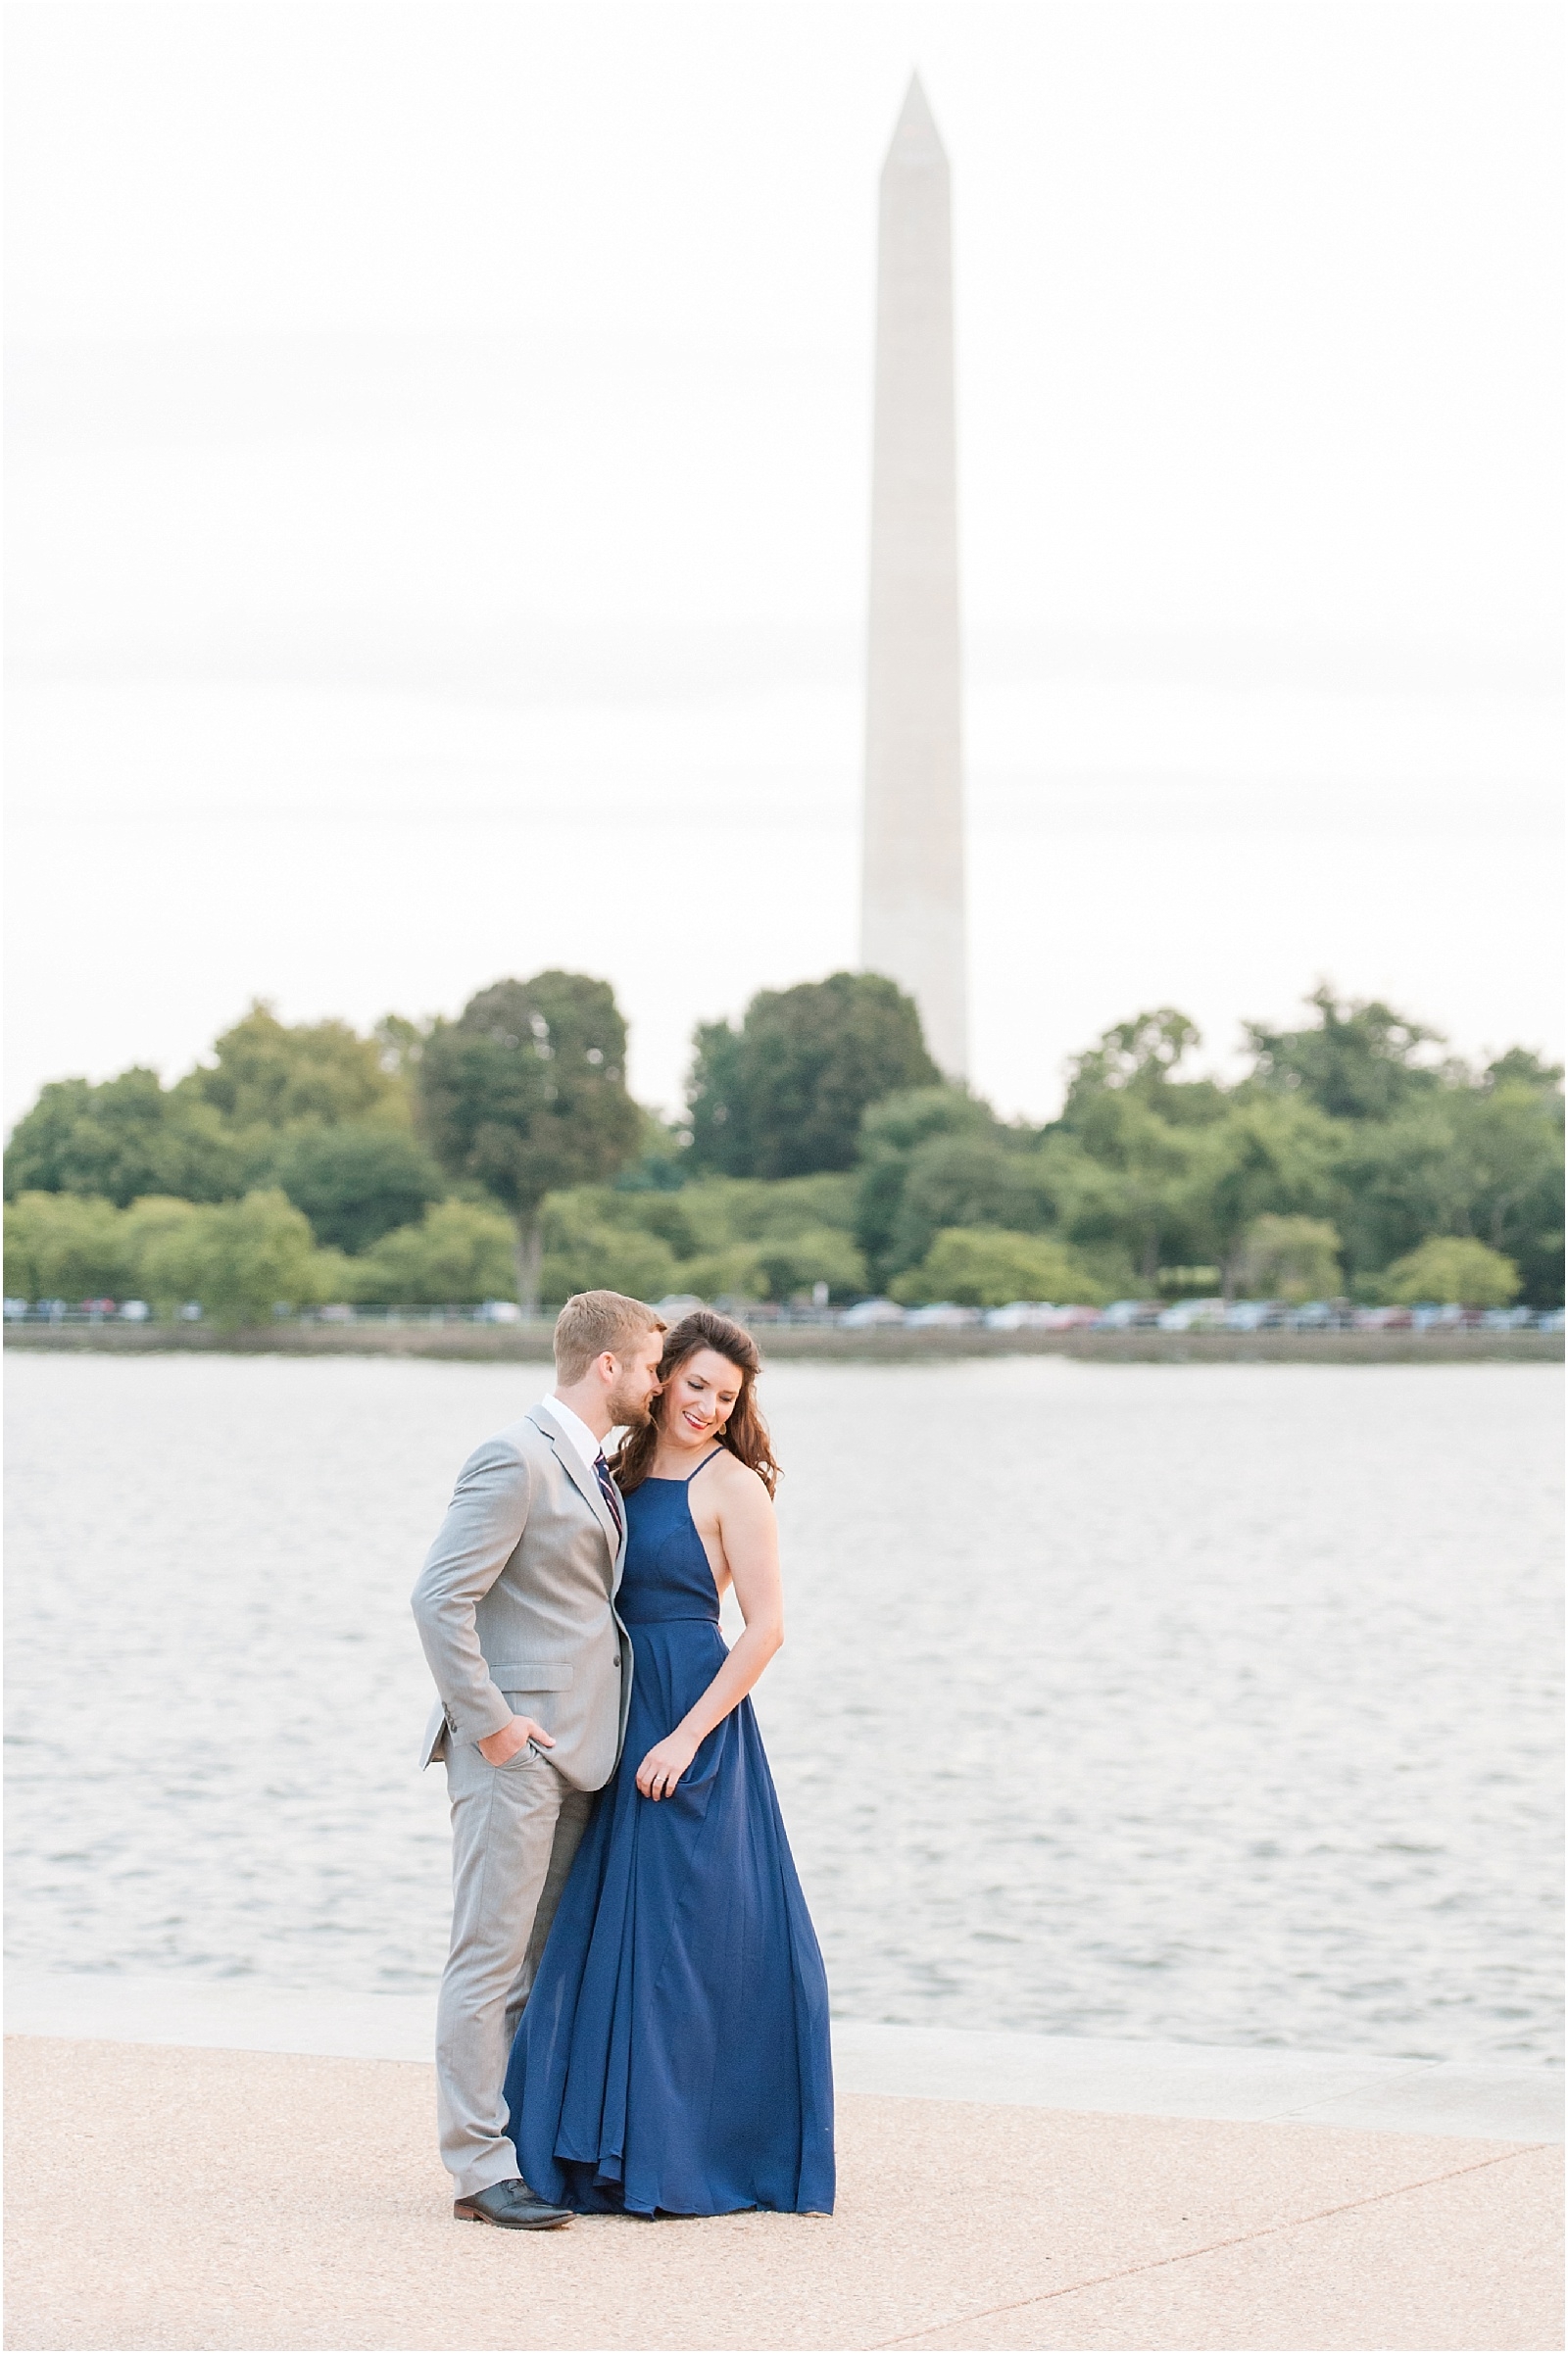 0001 Bret and Brandie Photography| Washington DC Engagement | Megan and Connor.jpg